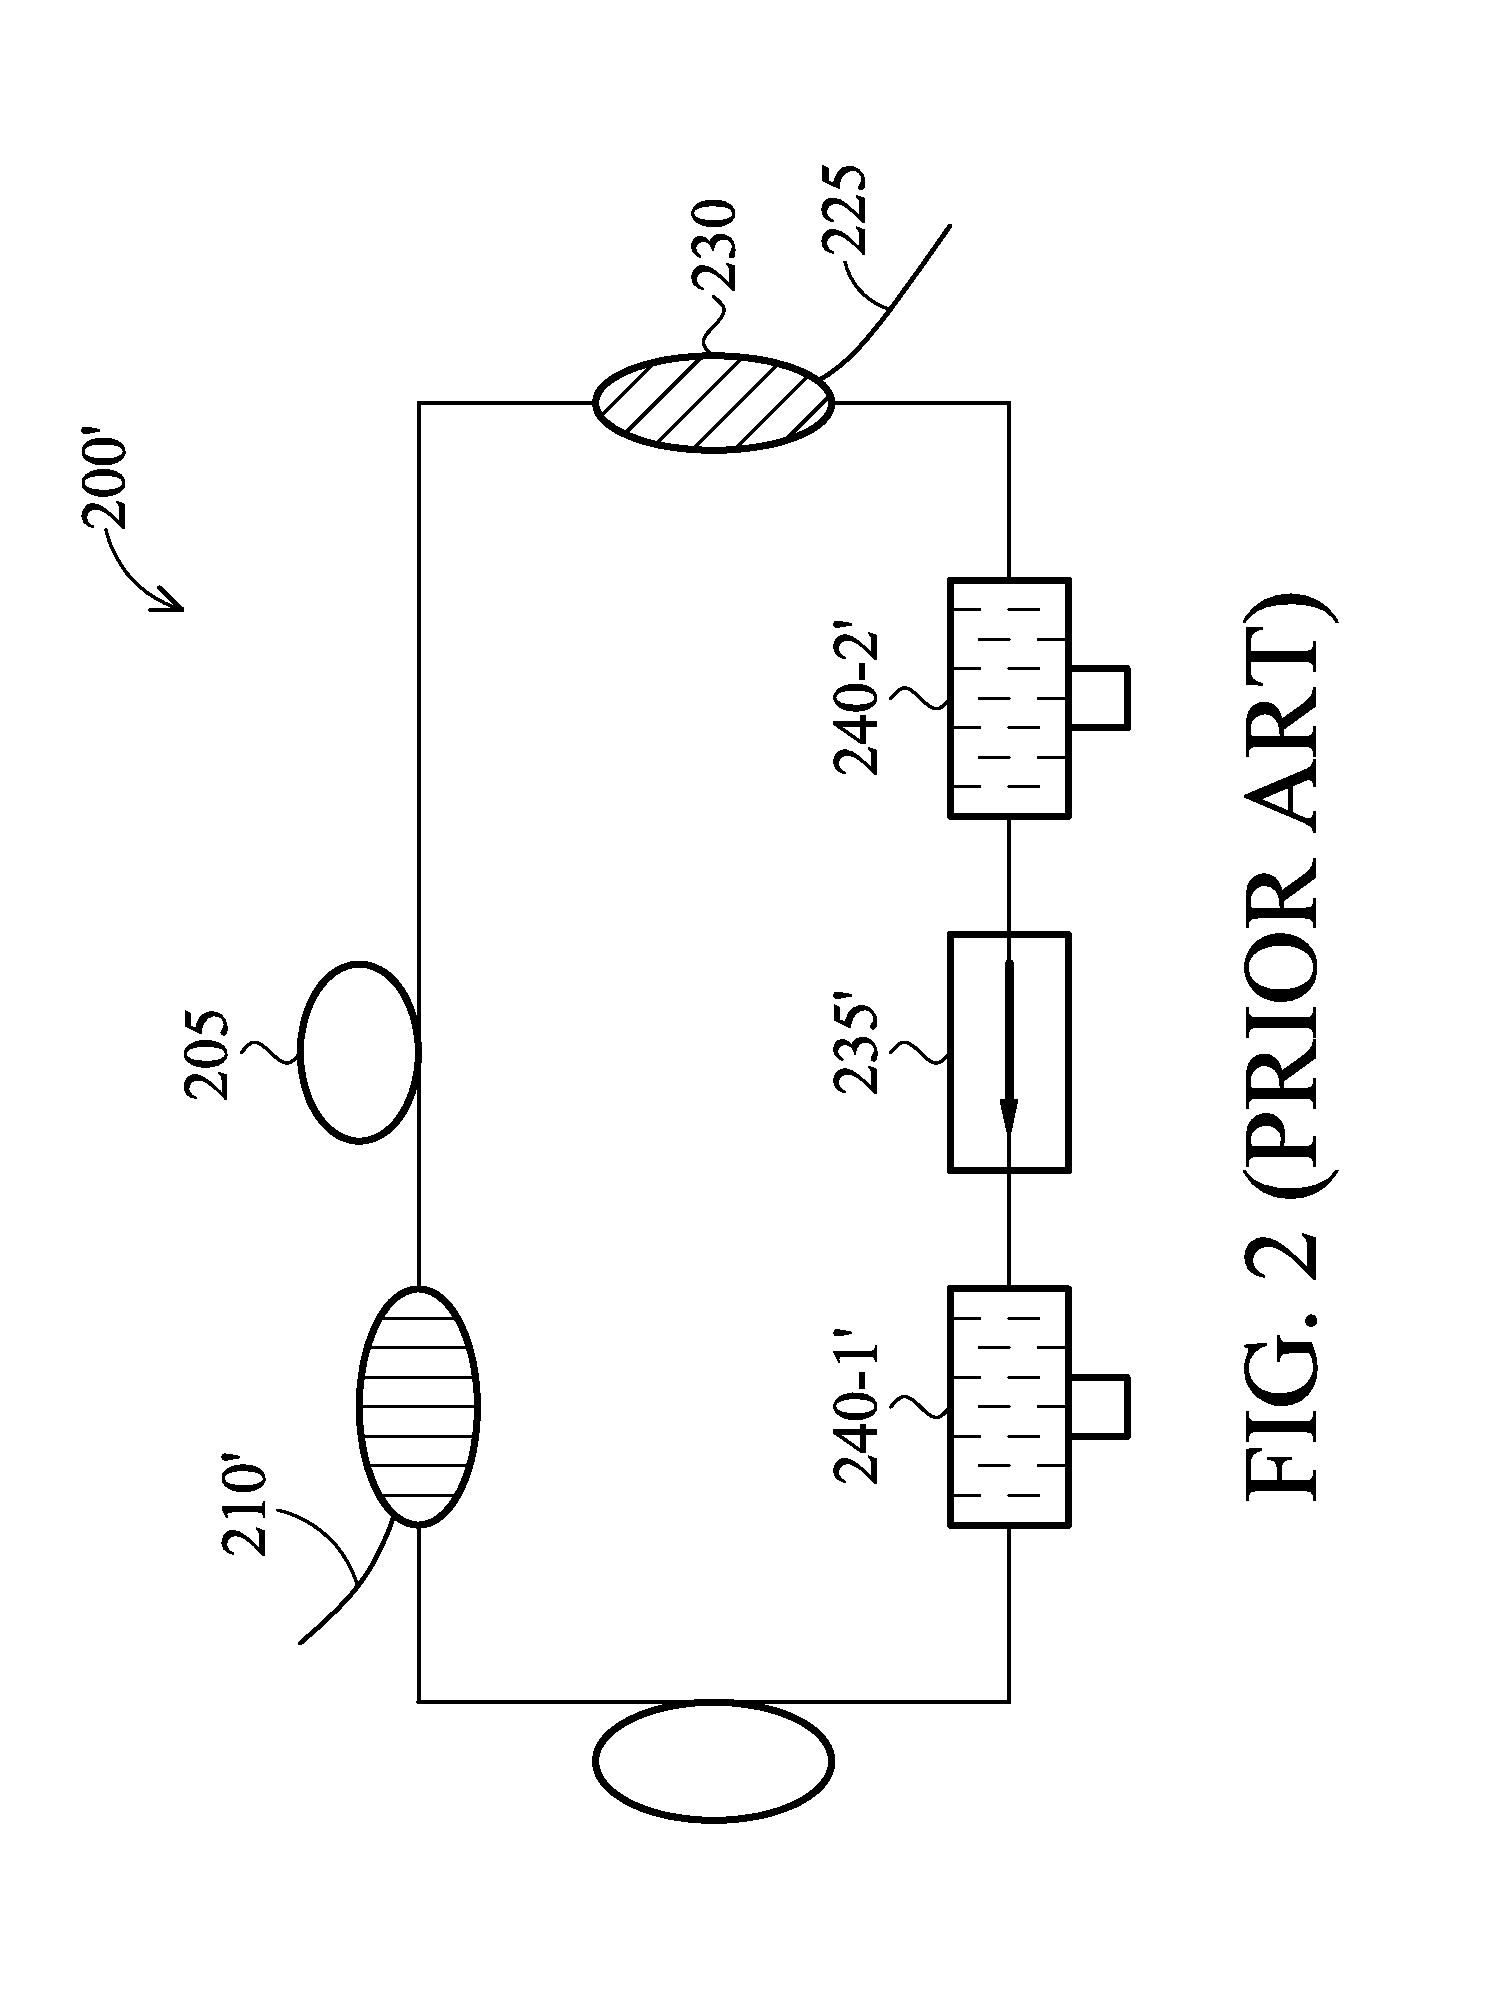 Ring or linear cavity of all-fiber-based ultra short pulse laser system and method of operating the same